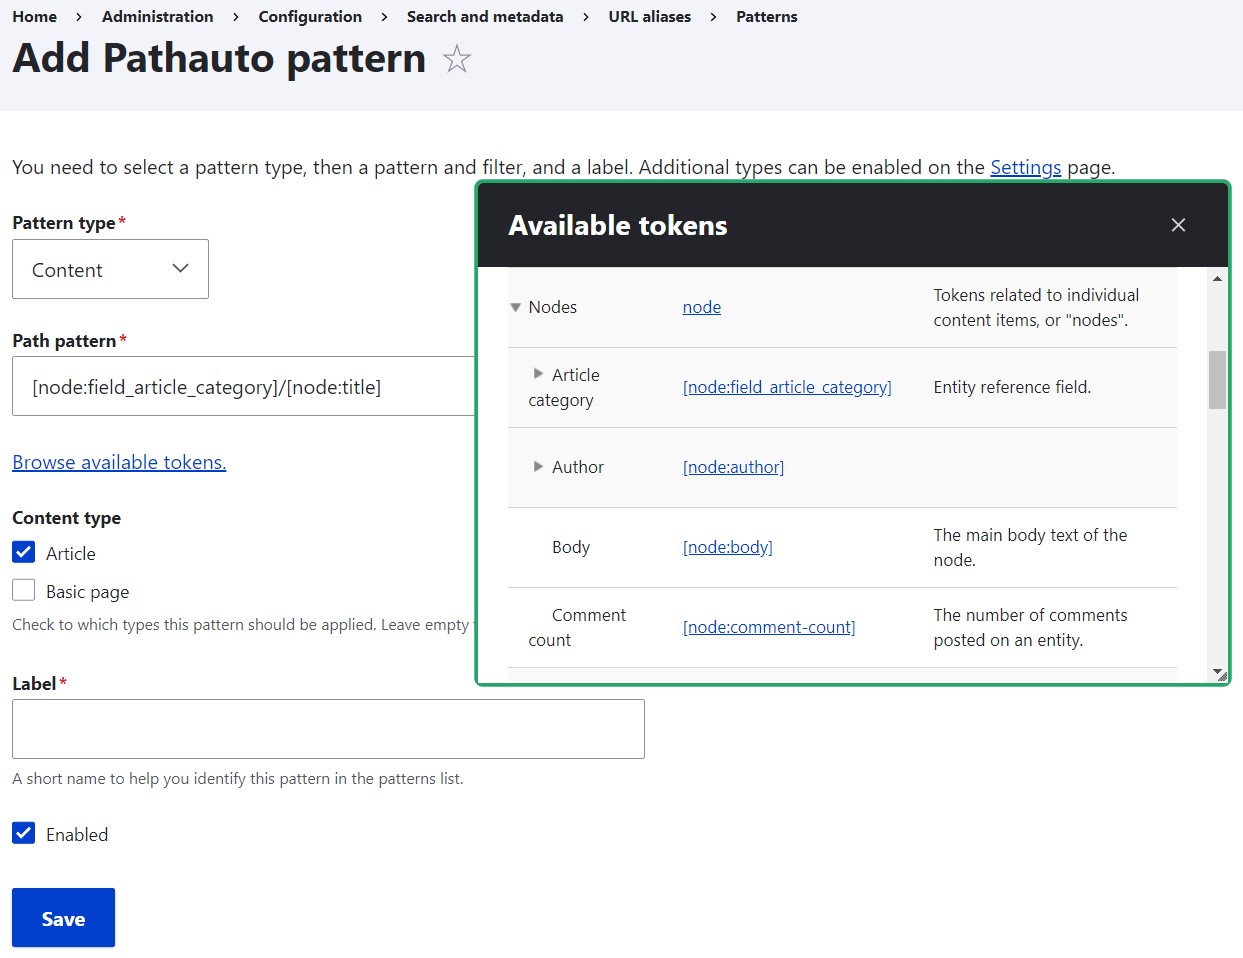 Creating patterns for automatic URL generation with the Pathauto and Token modules